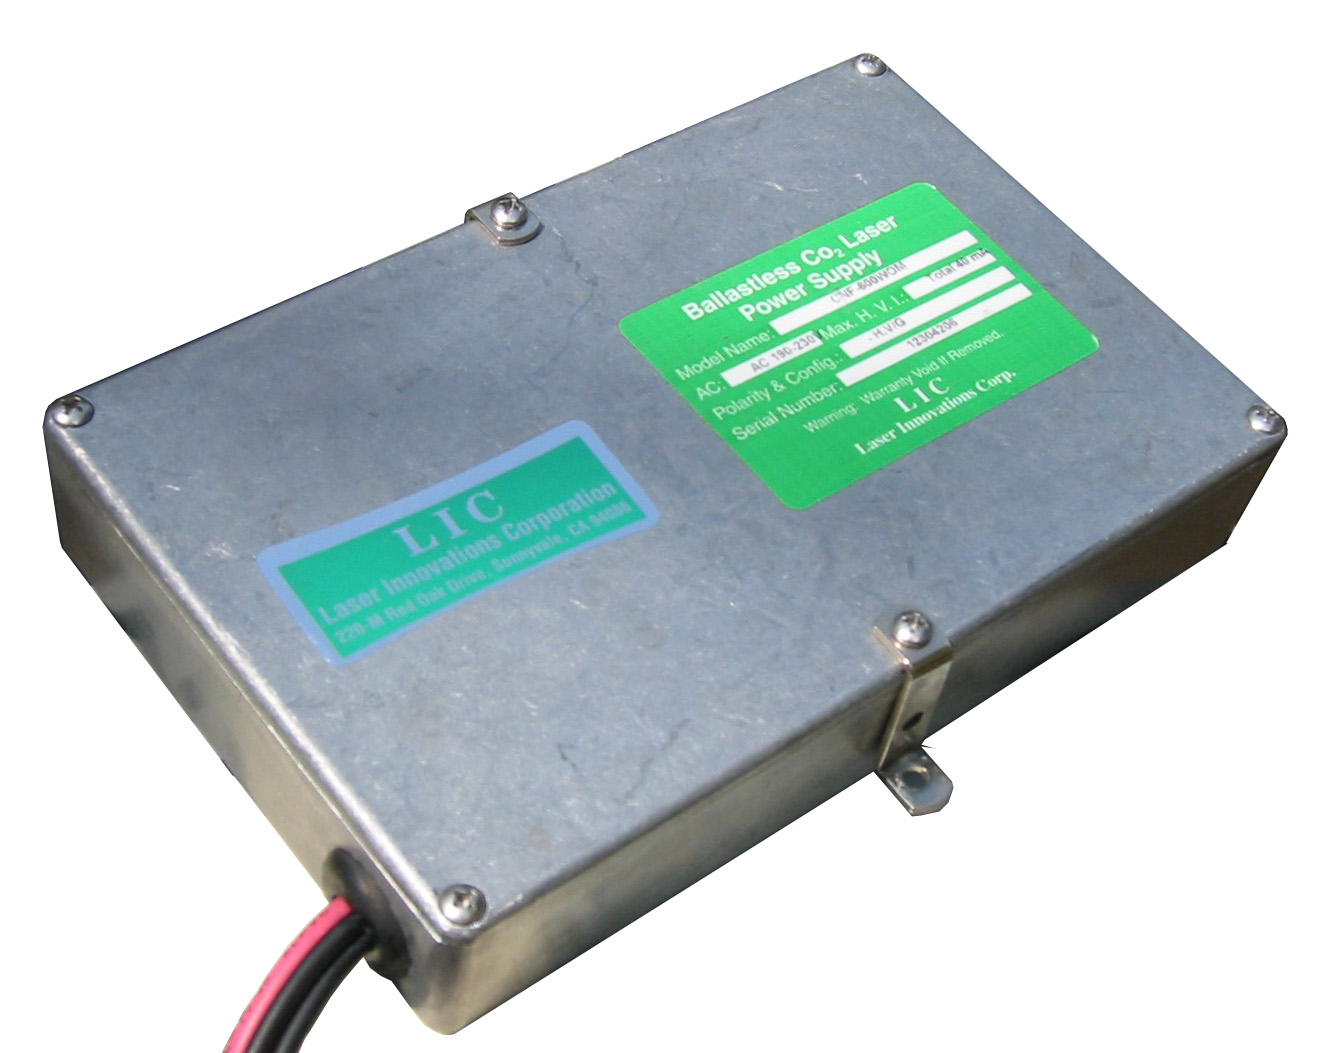 CPZ-200 – Ultra Compact CO2 Laser Power Supply